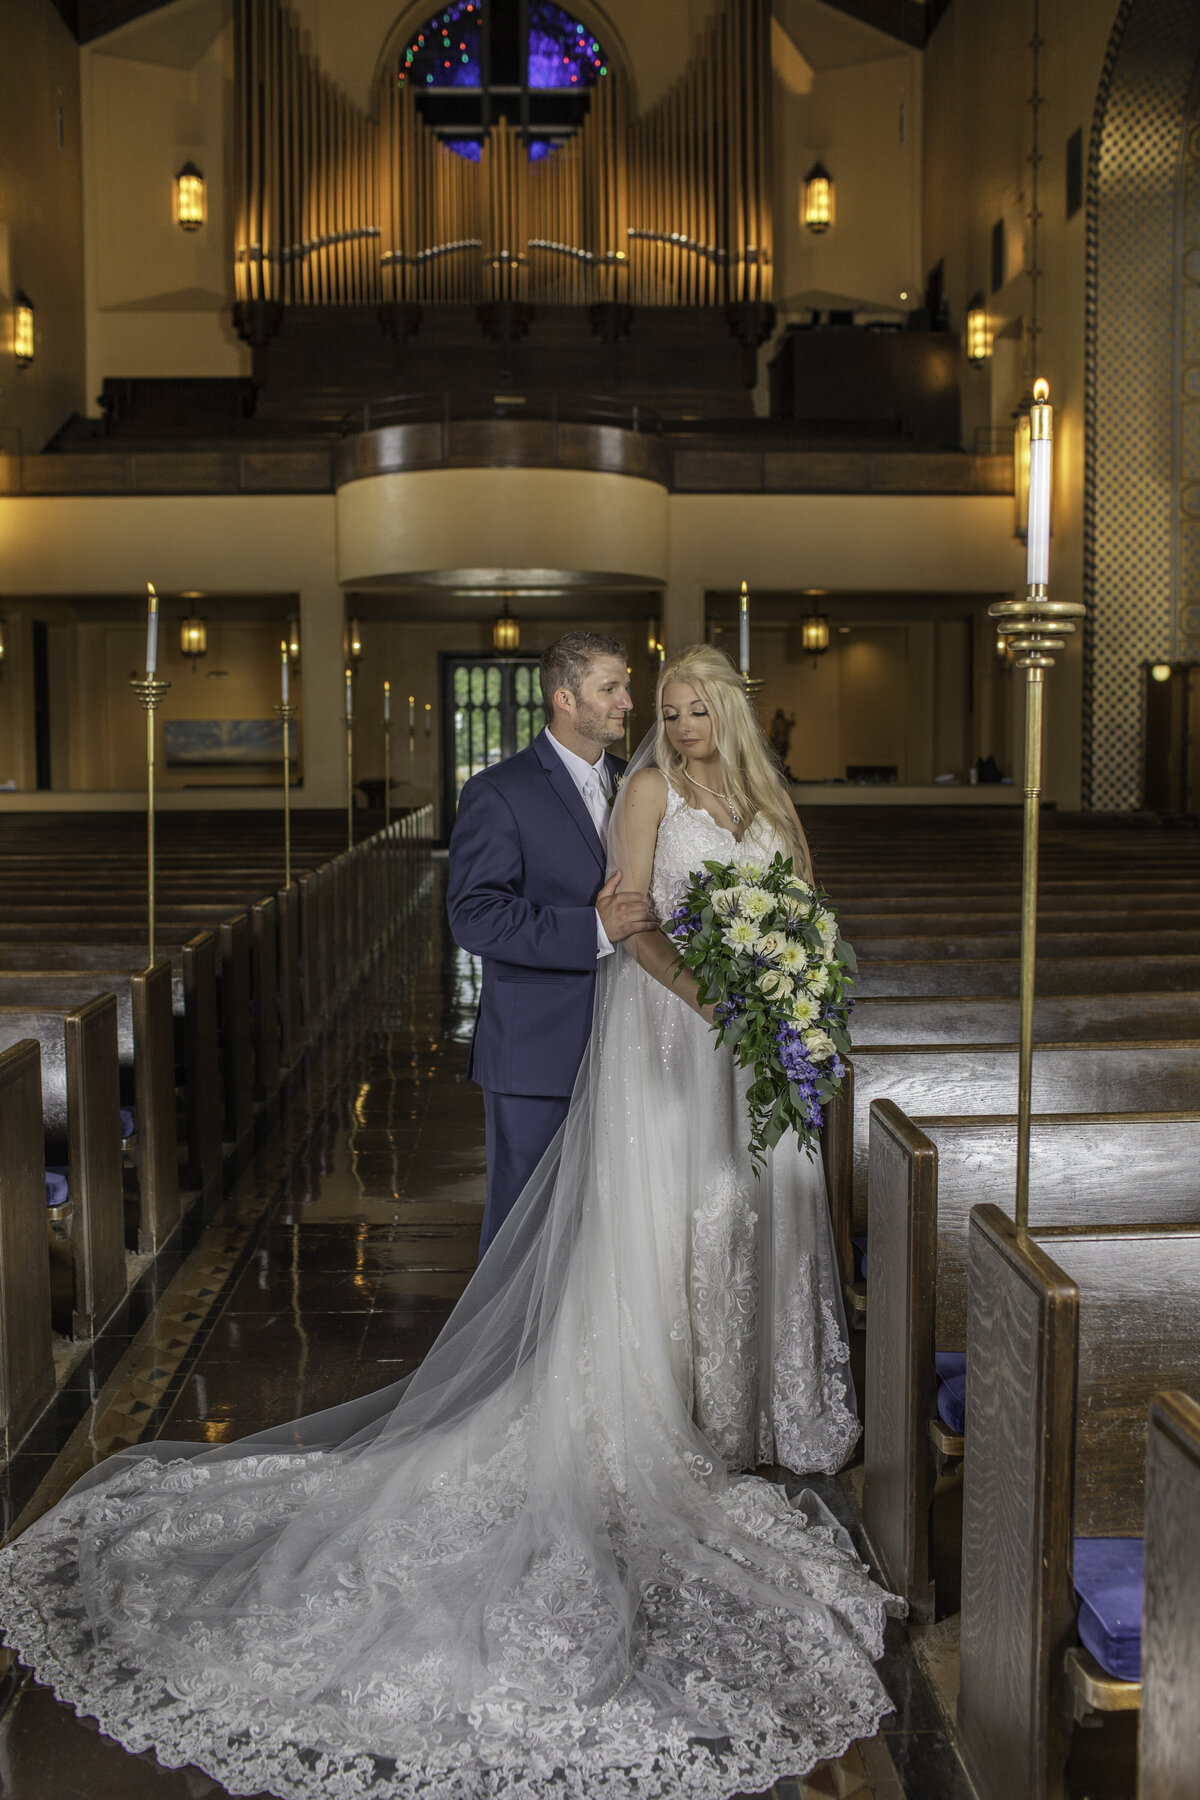 Bride and groom pose in the church aisle